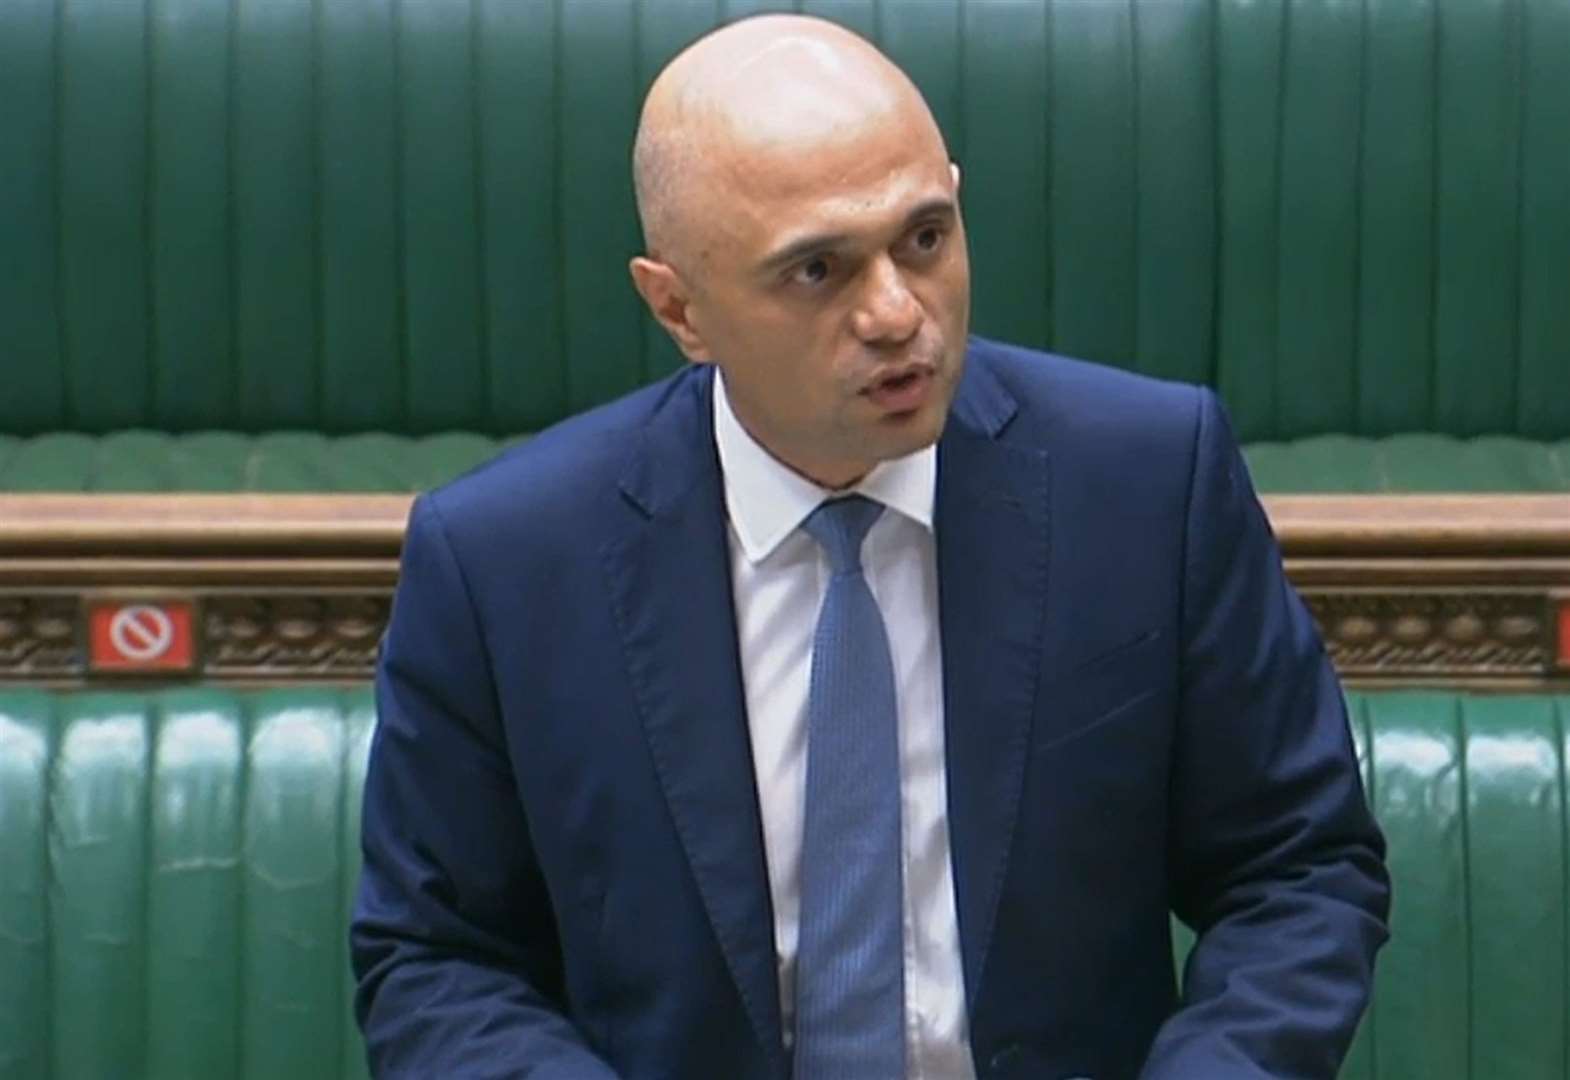 Health secretary Sajid Javid told the Commons the vaccine remains the "best line of defence".